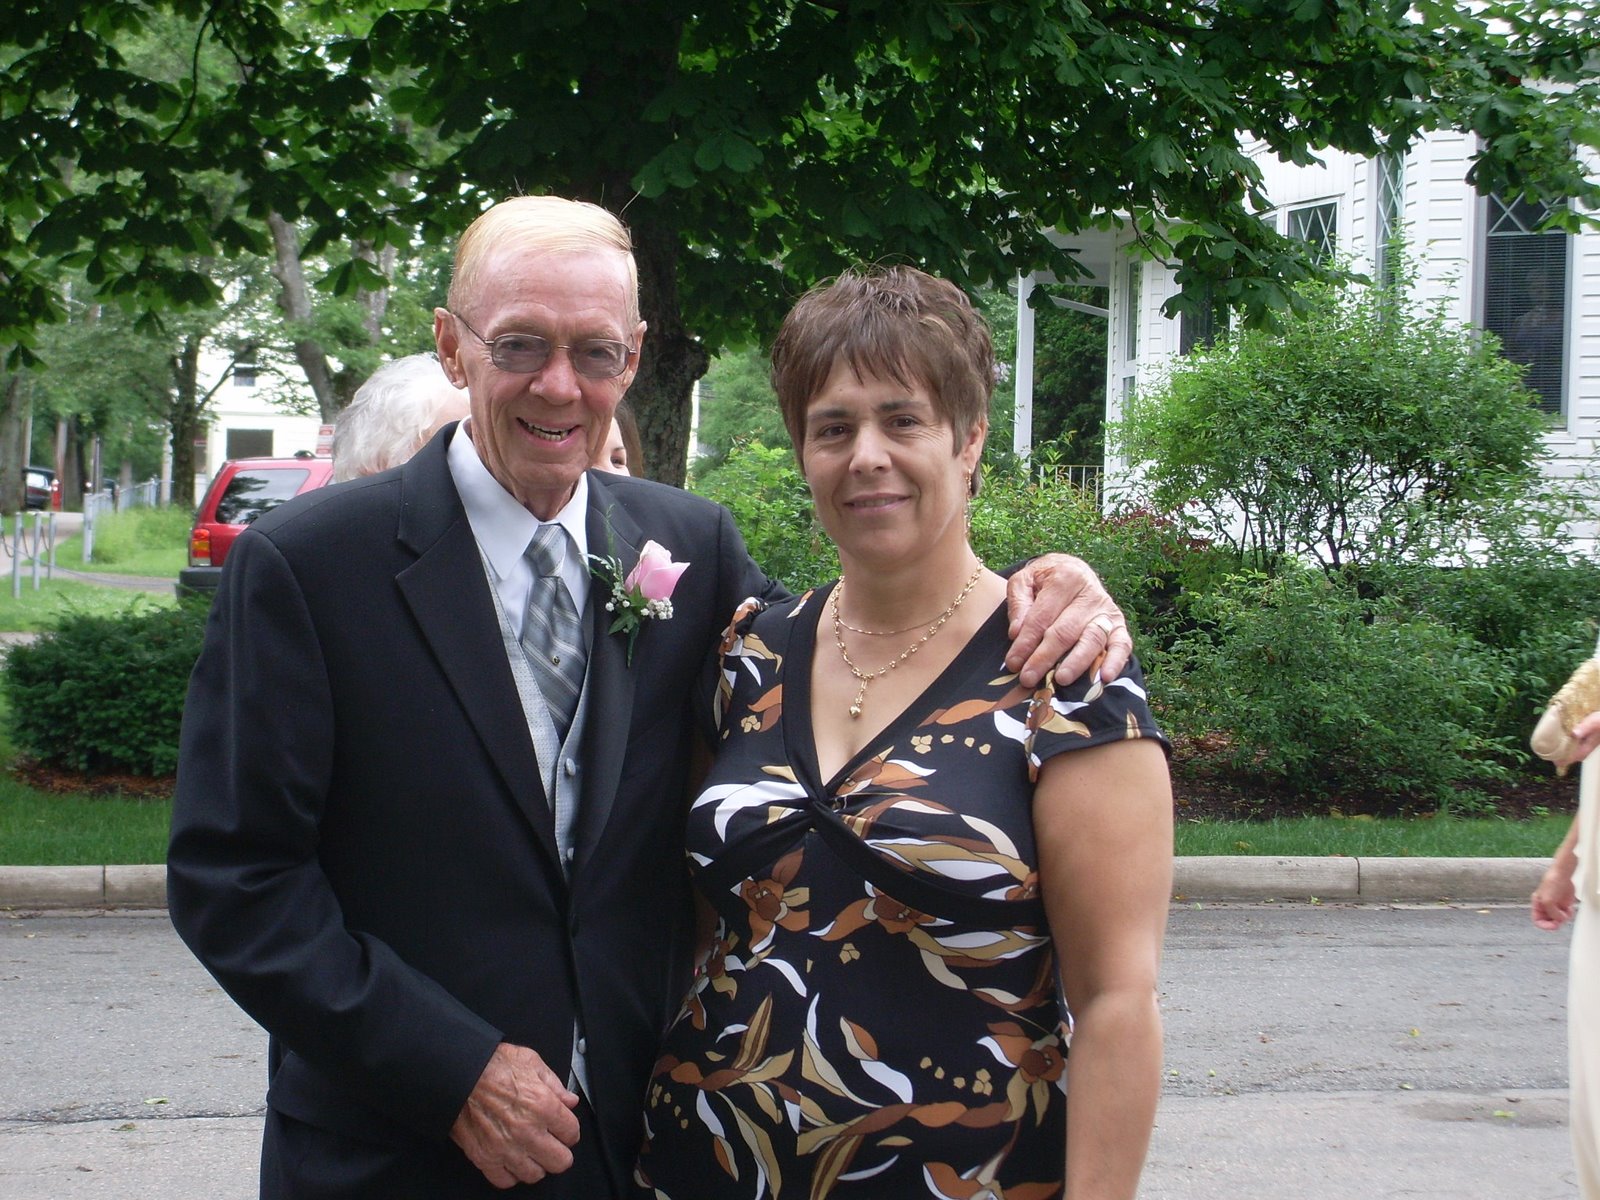 [Grandfather+and+Mom+Before+Ceremony+2.JPG]